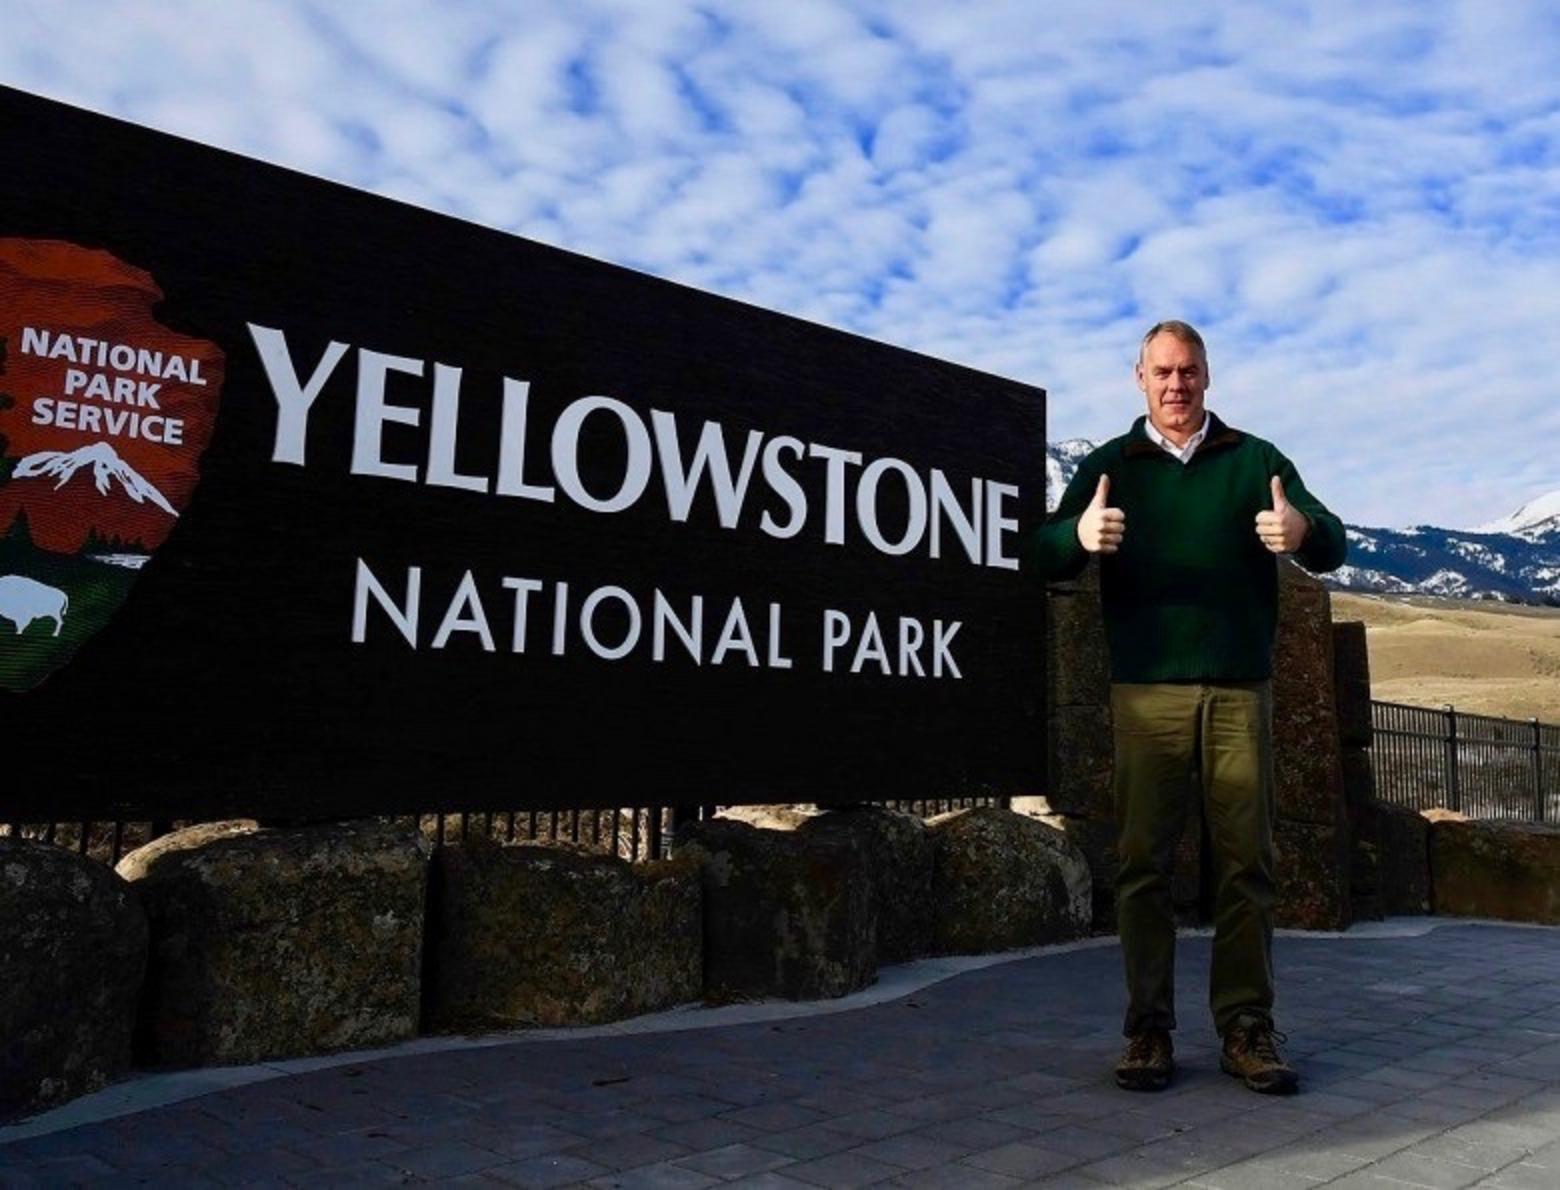 Ryan Zinke, during his recent short tenure as Interior Secretary, standing at the front gate of Yellowstone. Zinke believes limiting visitor numbers to Yellowstone is anathema. Instead, he wants to continue further turbo-charging recreation tourism by expanding the size of facilities, building more trails and infrastructure to accommodate more people not only in parks but on all public lands. Today, Zinke's desire to intensively enlarge the footprint of outdoor recreation is shared by the Biden Administration, members of the outdoor recreation industry he was previously at odds with and even conservation organizations. Photo courtesy NPS